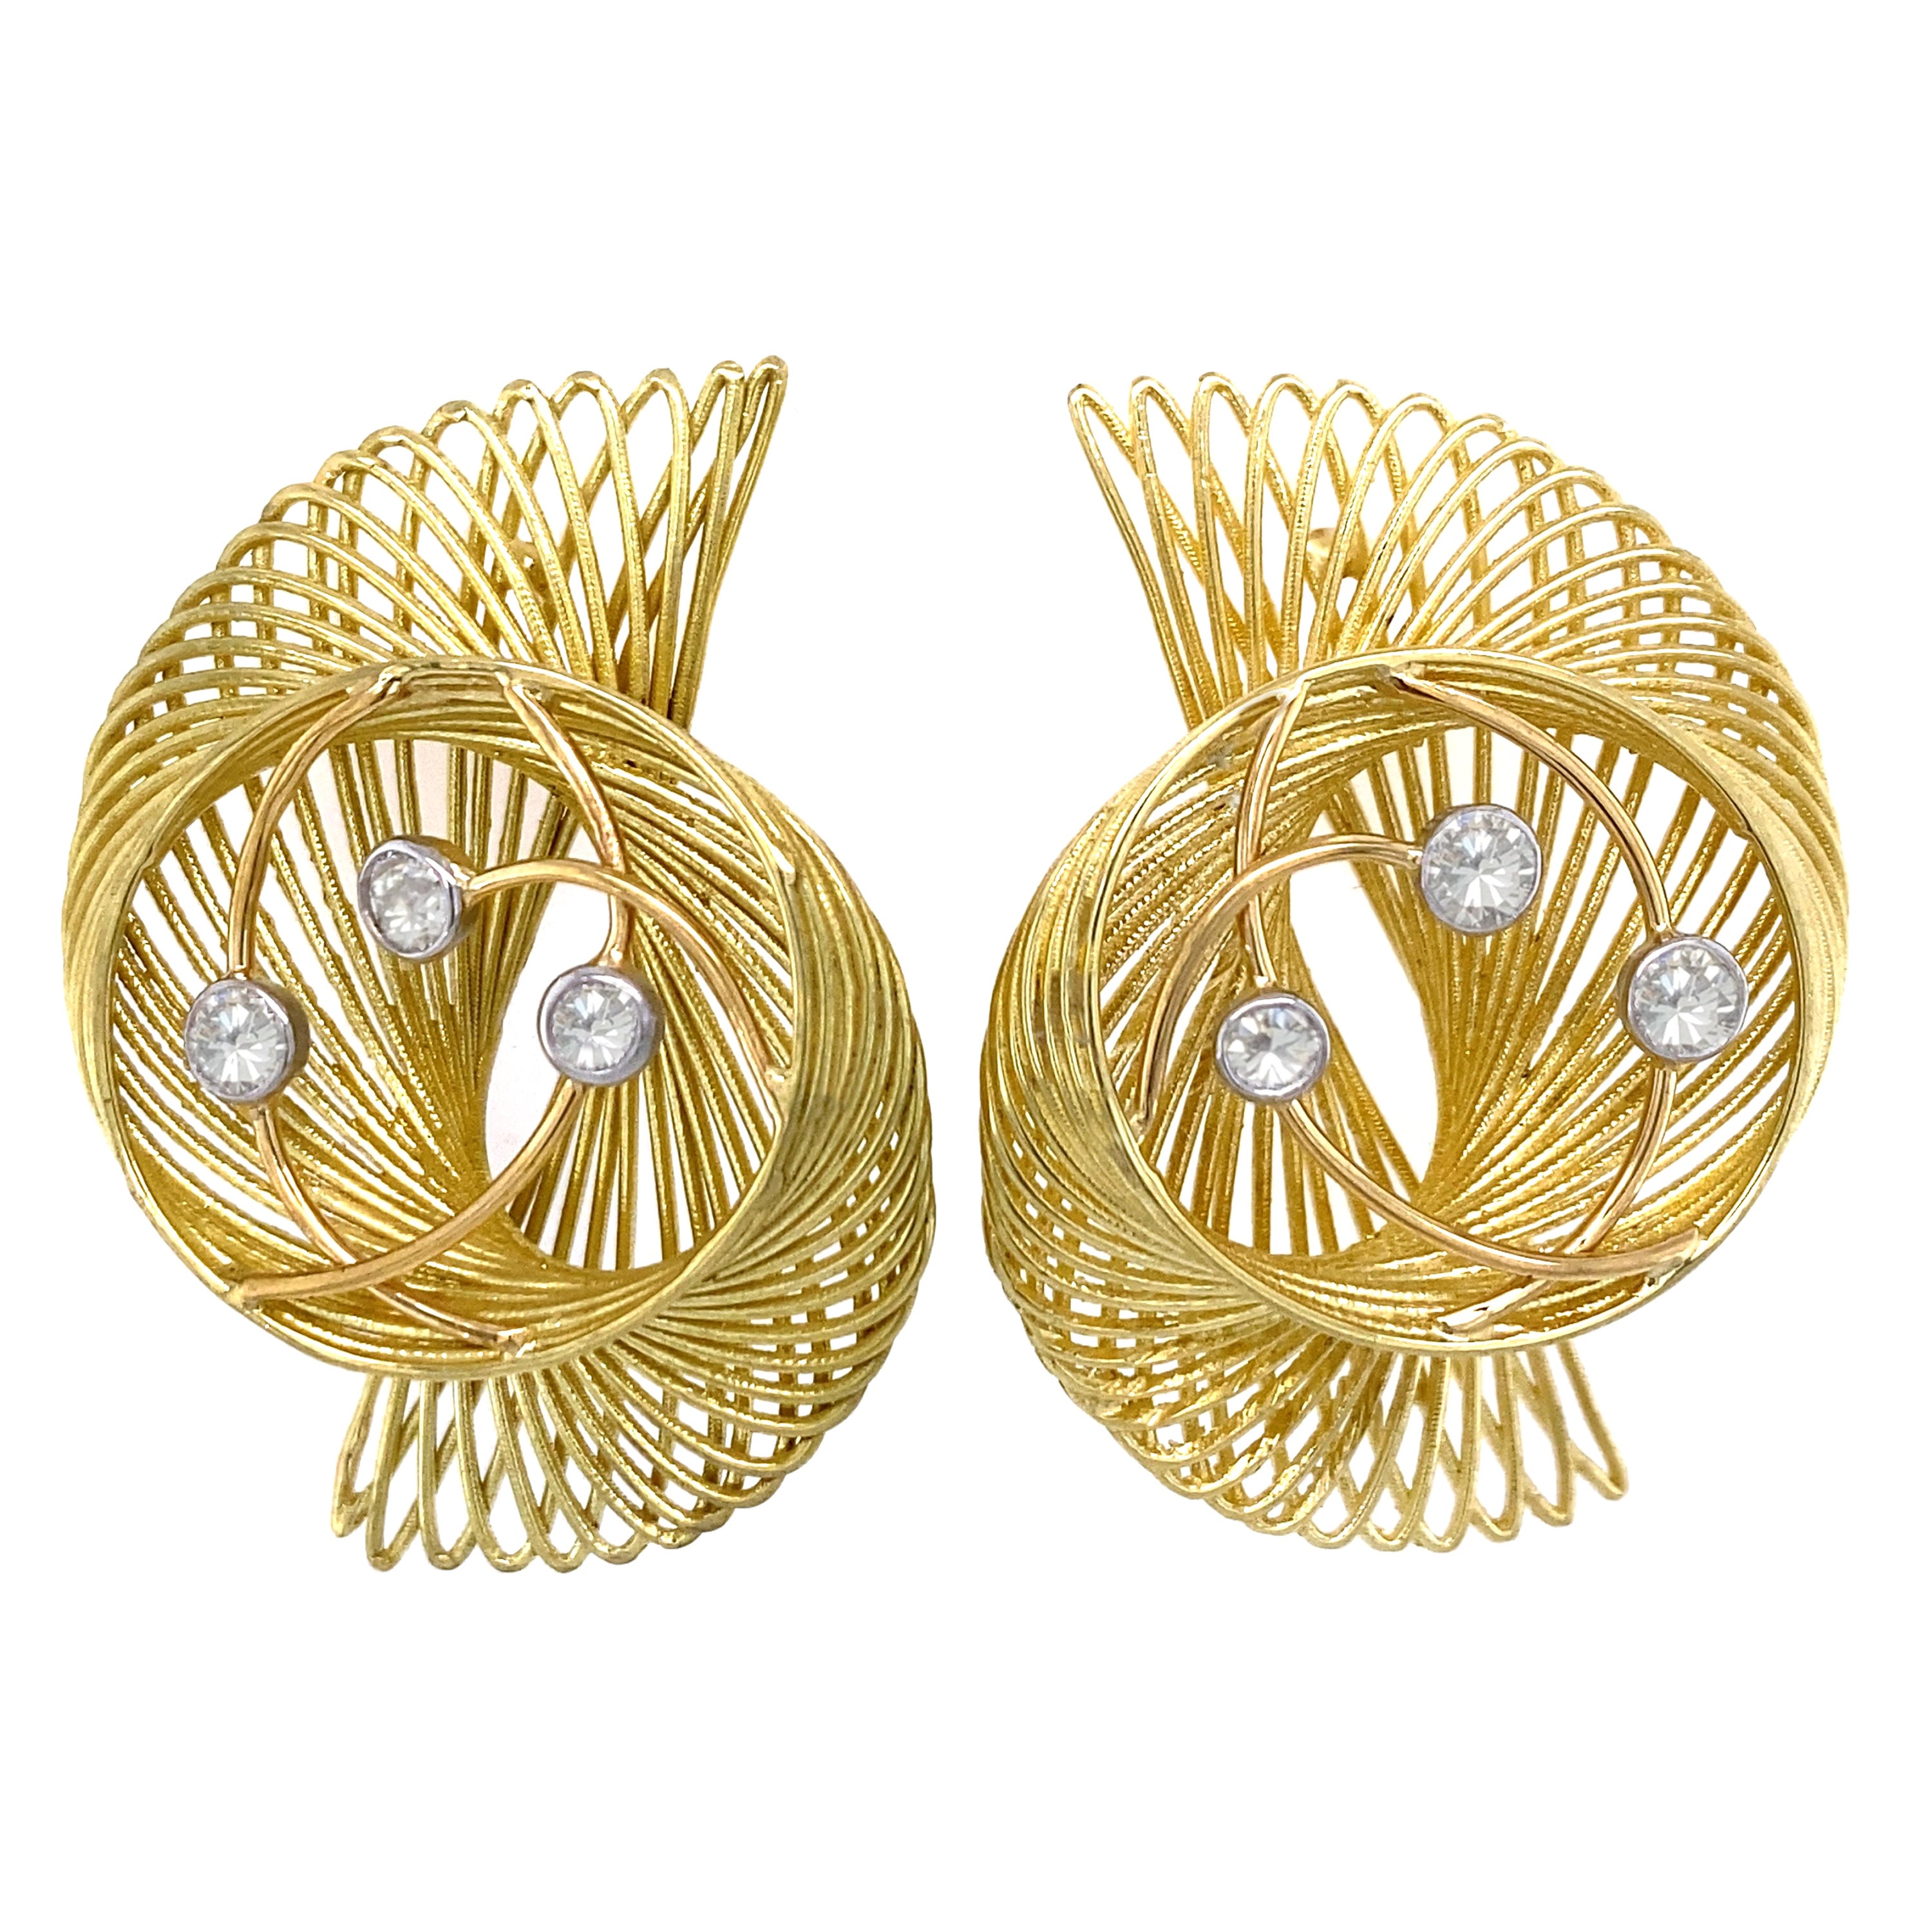 "Gidi" Spiral Earrings in 18 Karat Gold & 0.65 Carats of Natural White Diamonds For Sale